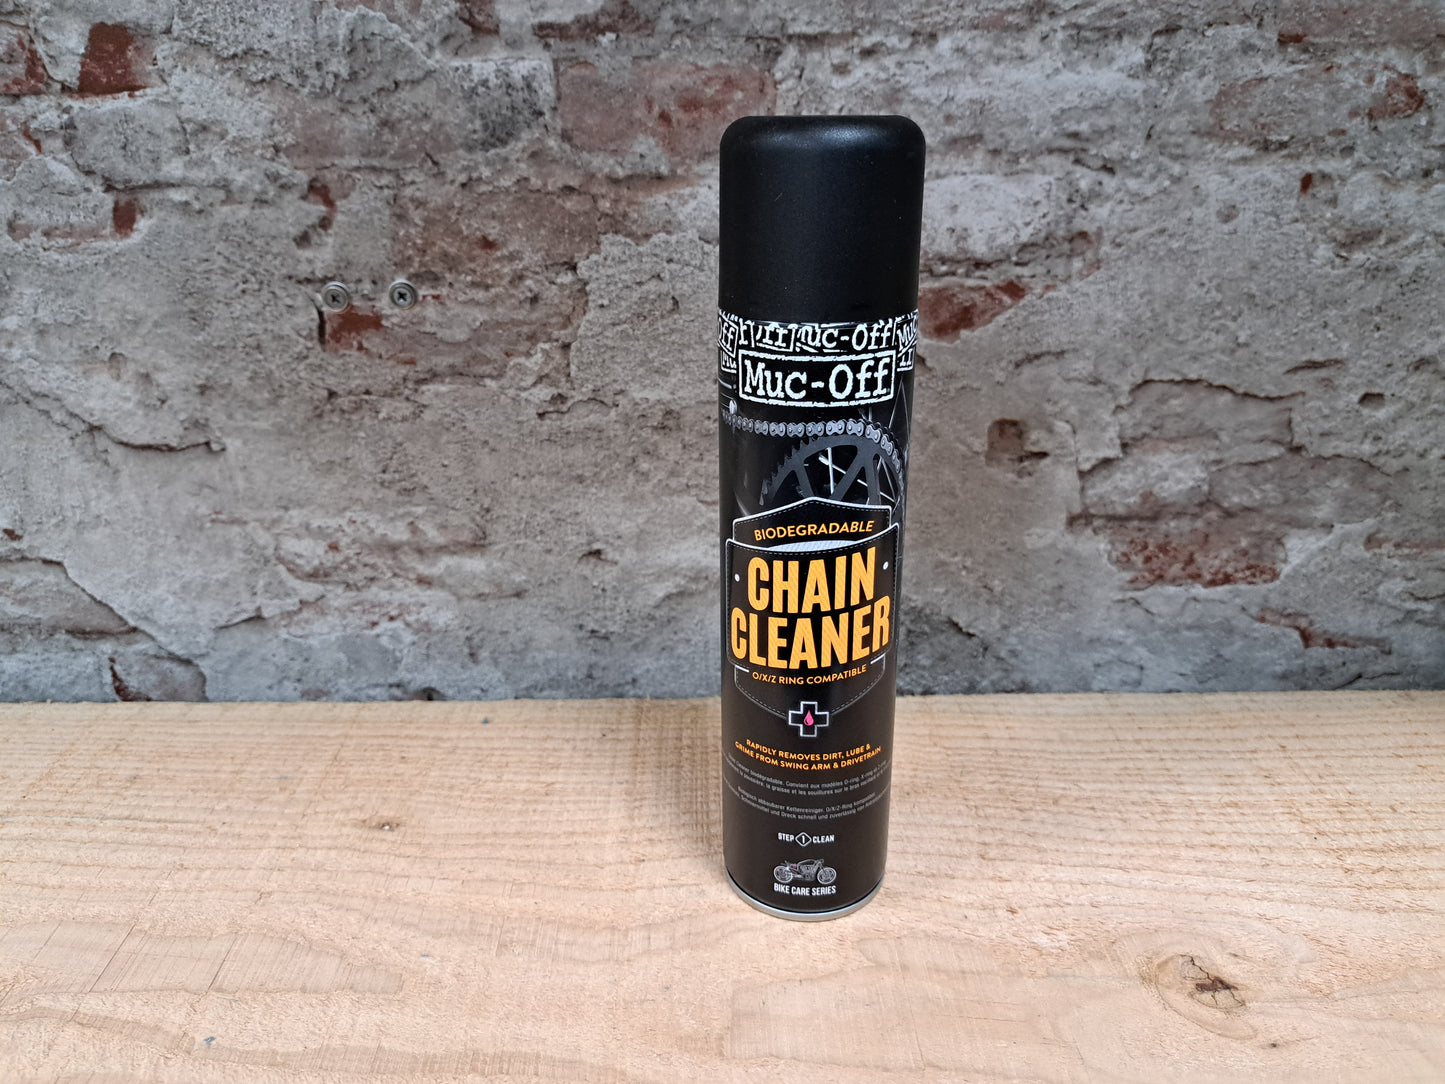 Muc-Off Chain Cleaner Biodegradable